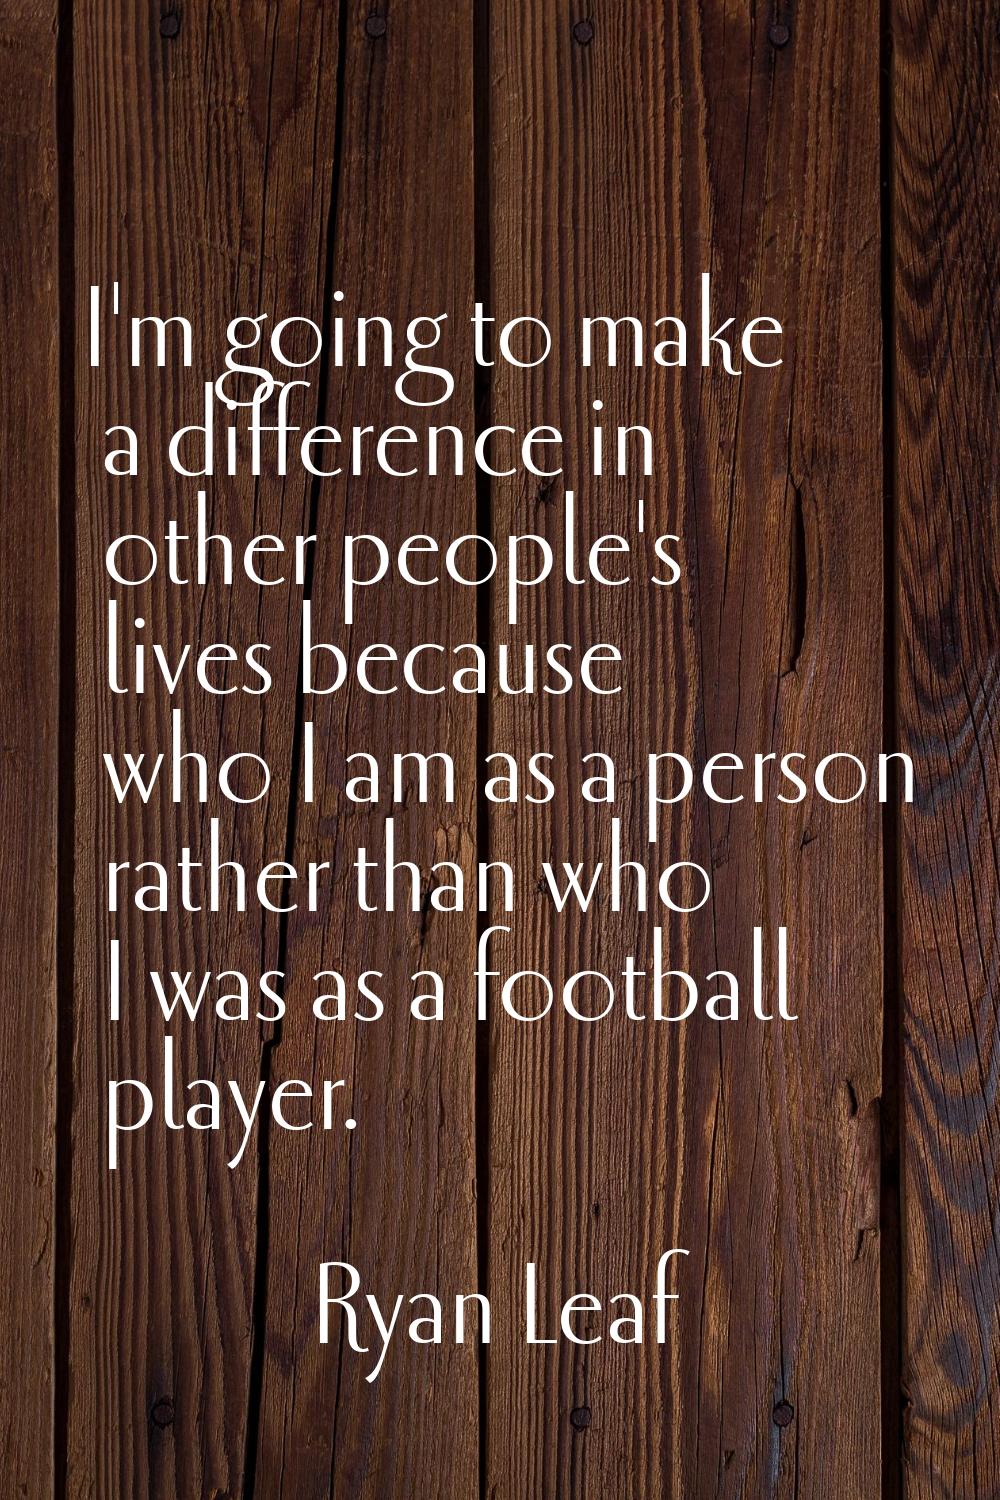 I'm going to make a difference in other people's lives because who I am as a person rather than who